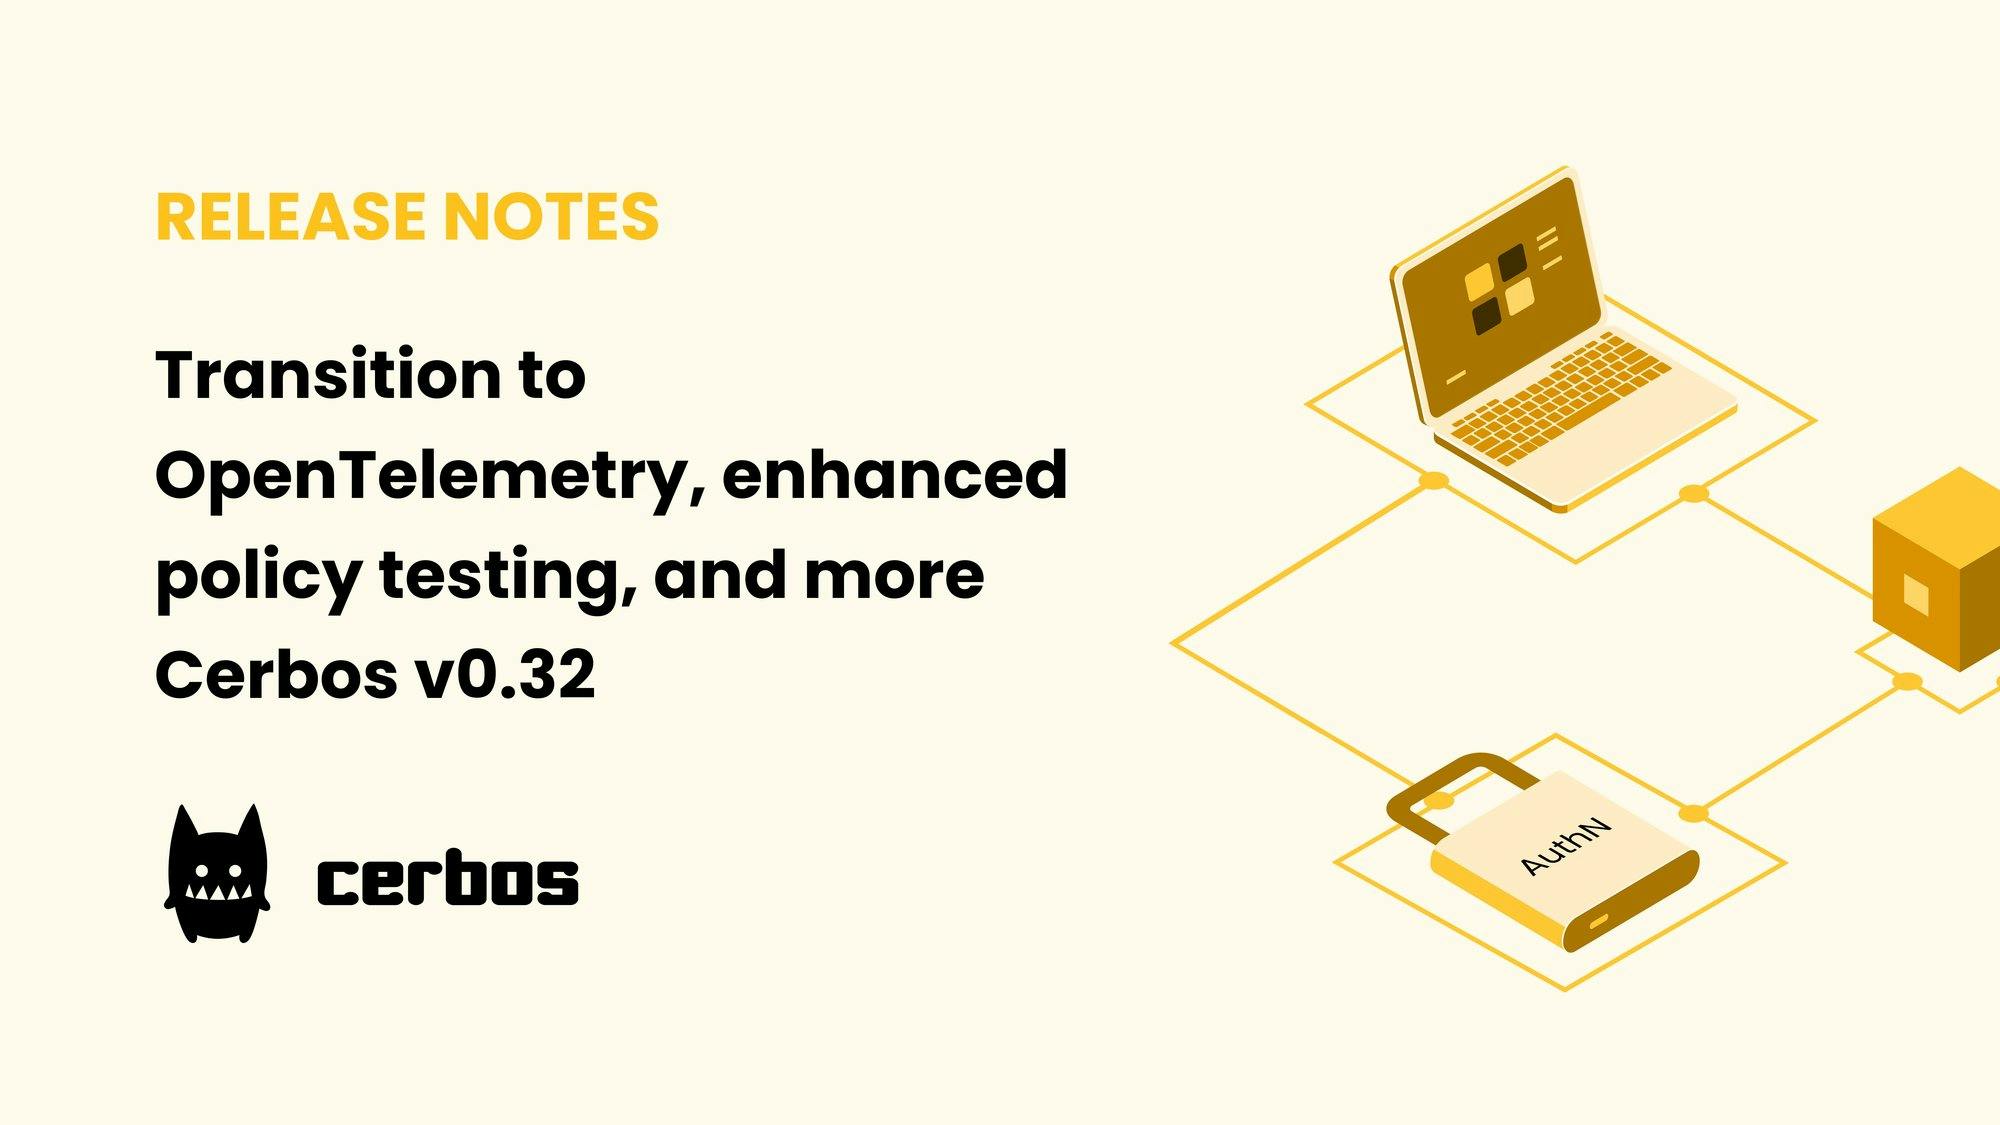 Transition to OpenTelemetry, enhanced policy testing, and more - Cerbos v0.32